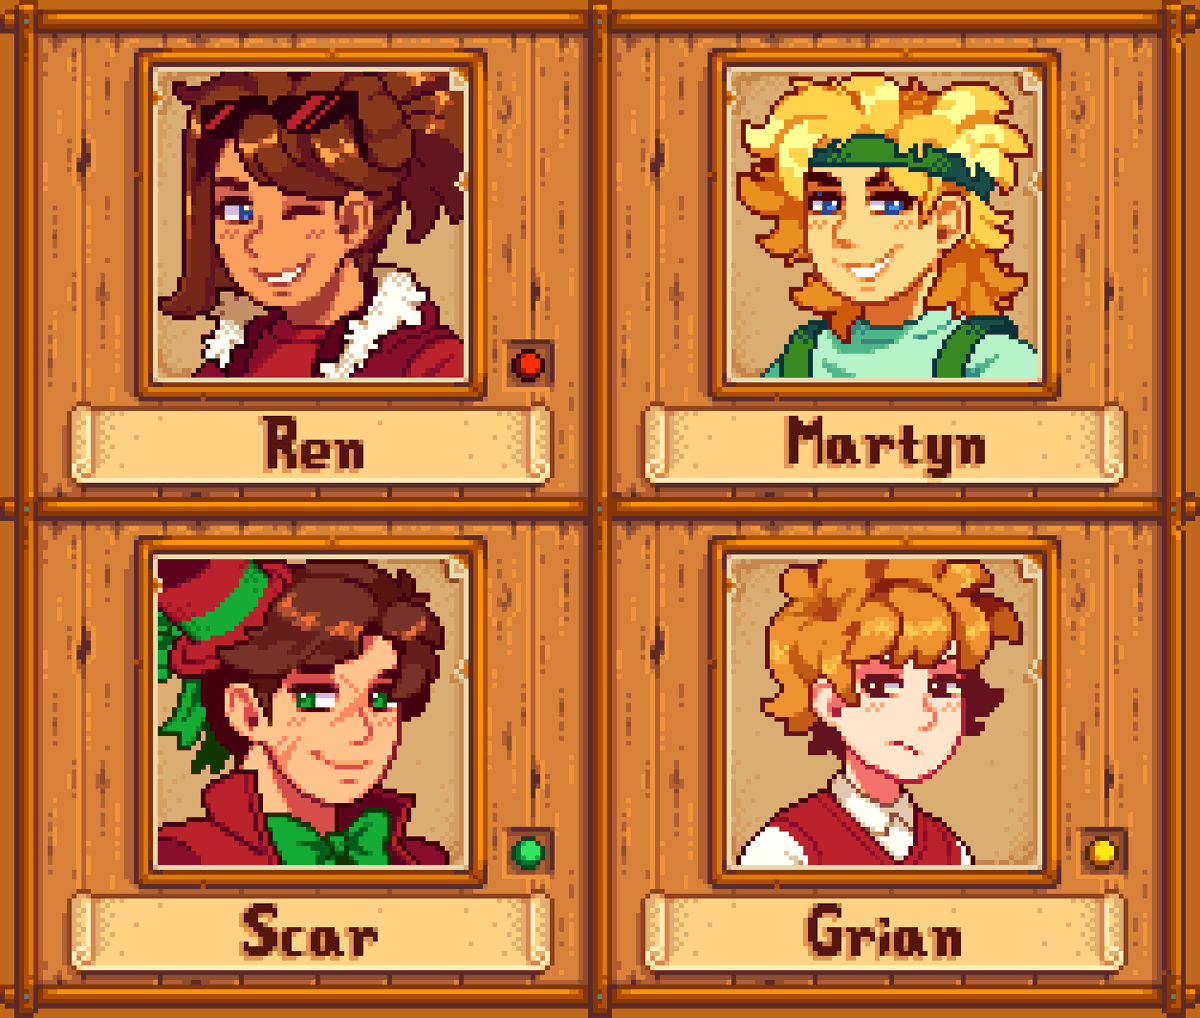 My friends Froag and Beans made a Stardew Valley AU so I wanted to make these fake portraits ^-^

[#rendogfanart #itlwart #gtwscarfanart #grianfanart #traffictwt]